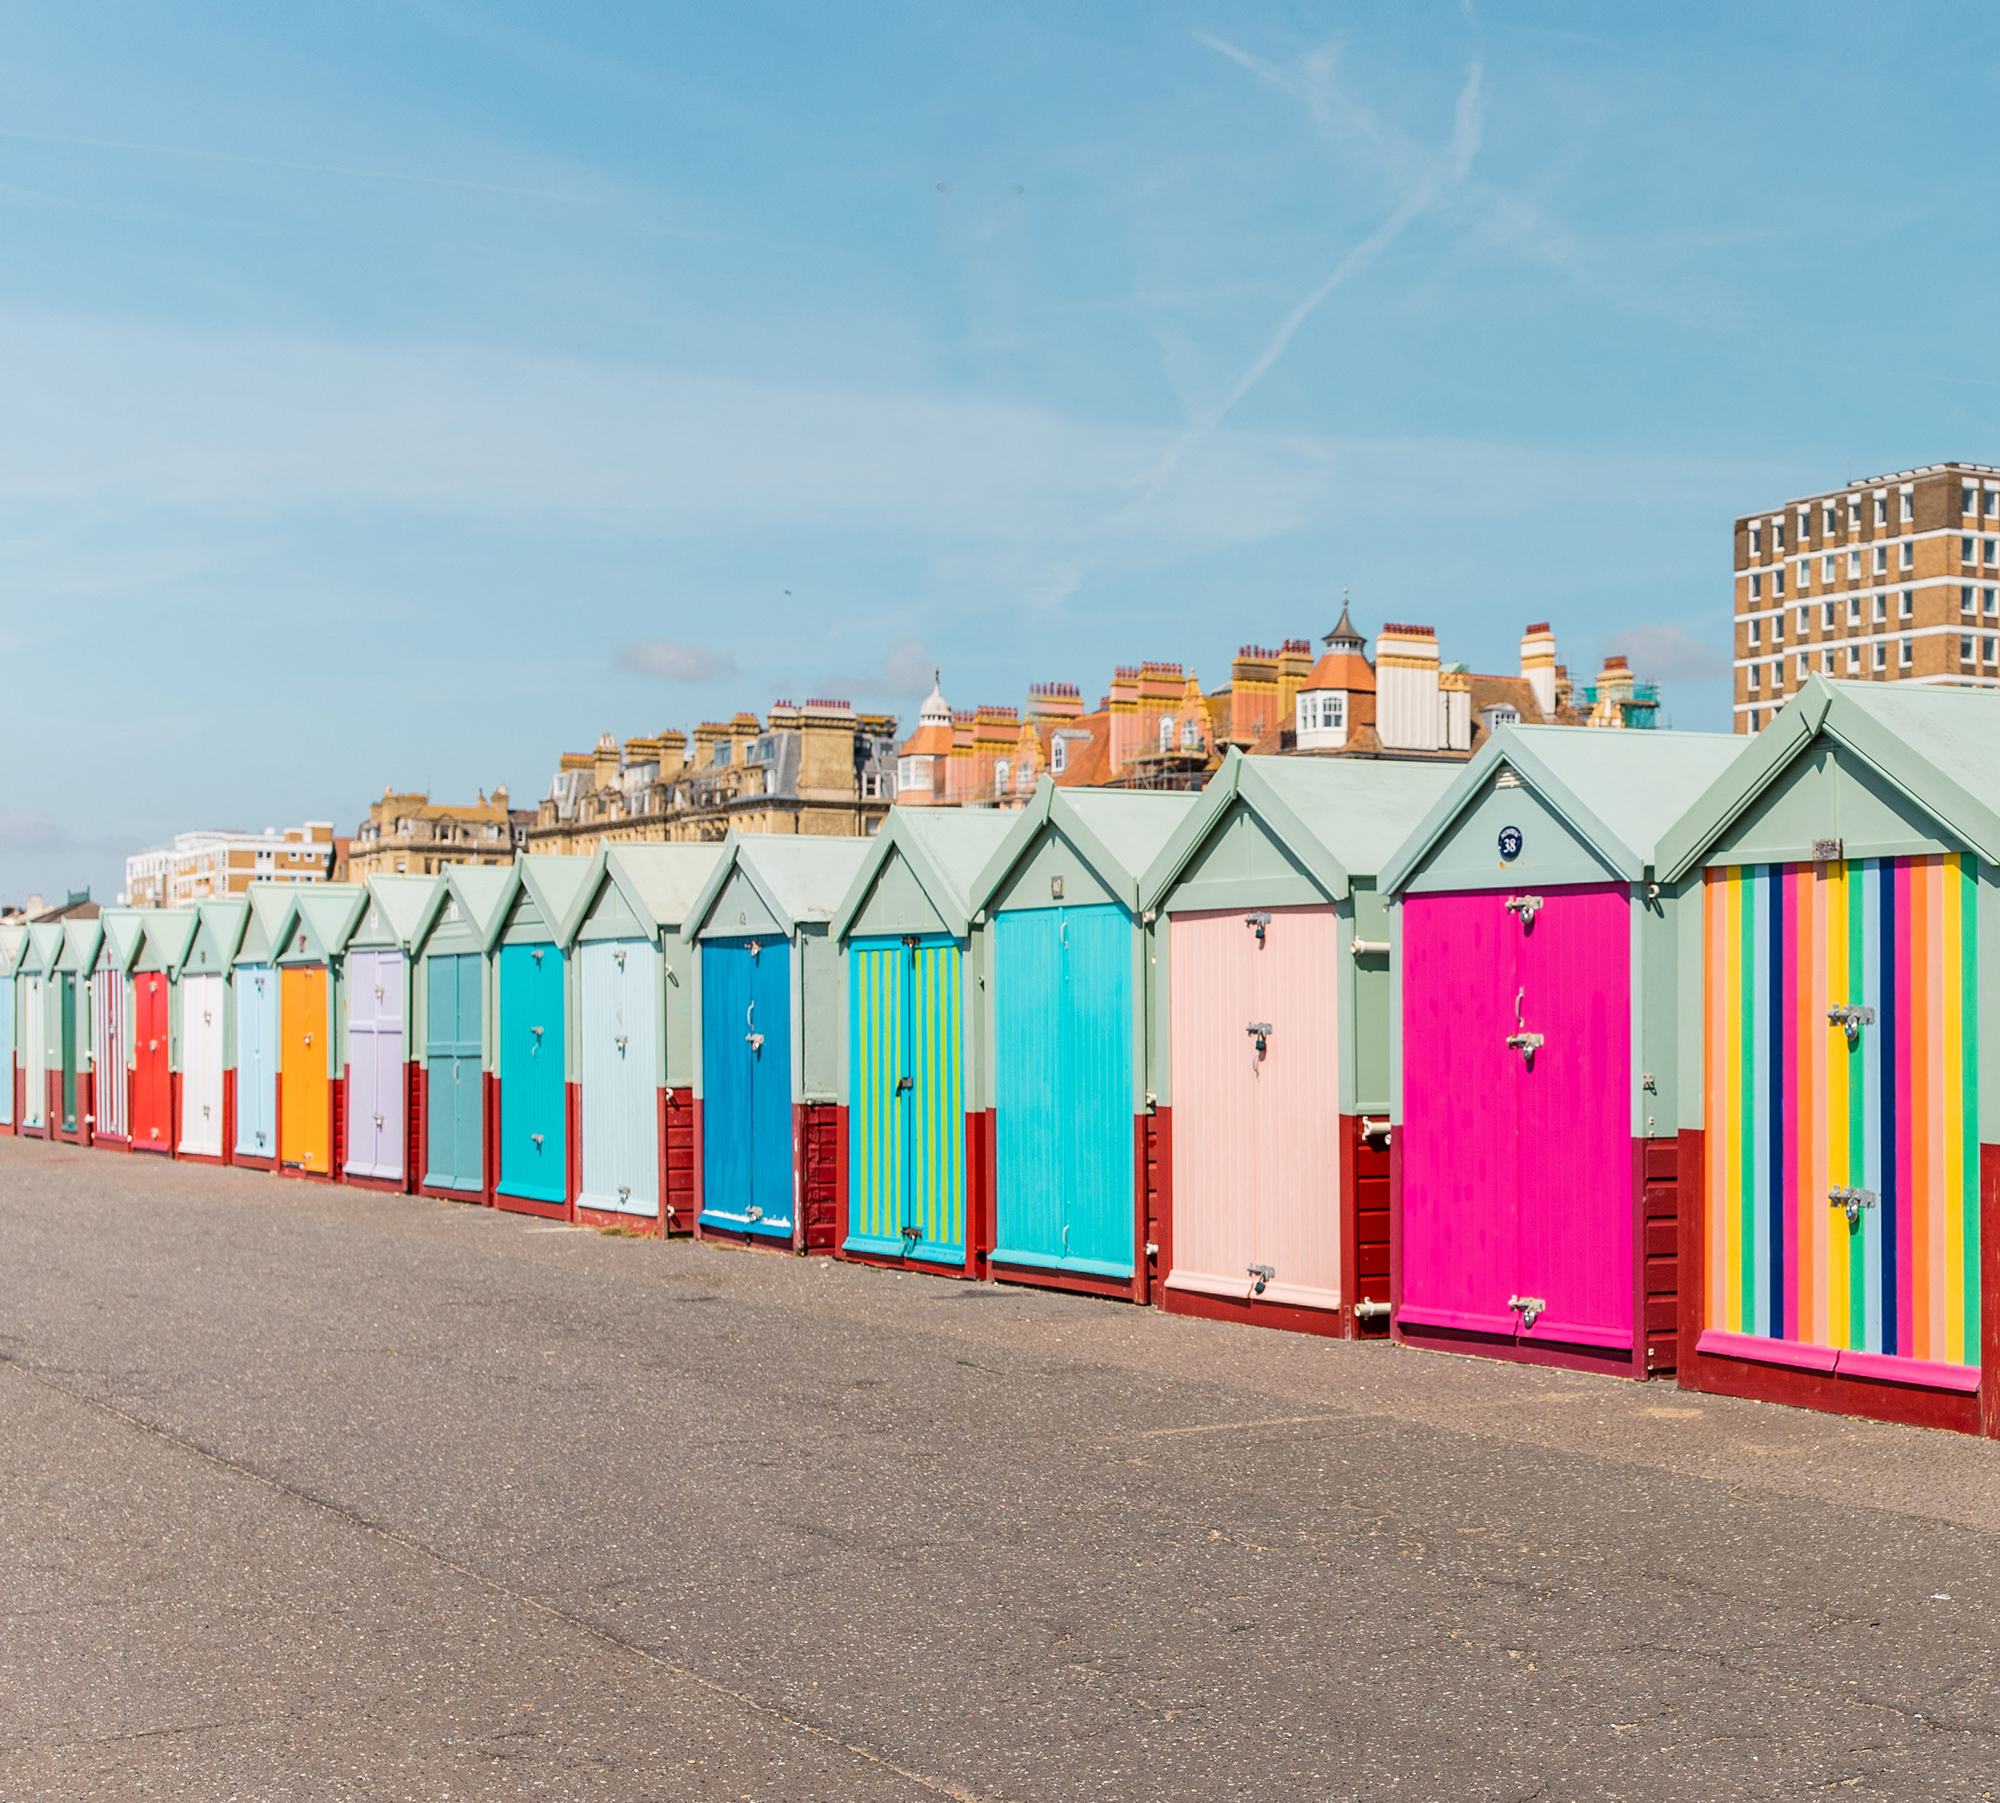 City Guide: Top things to do in Brighton